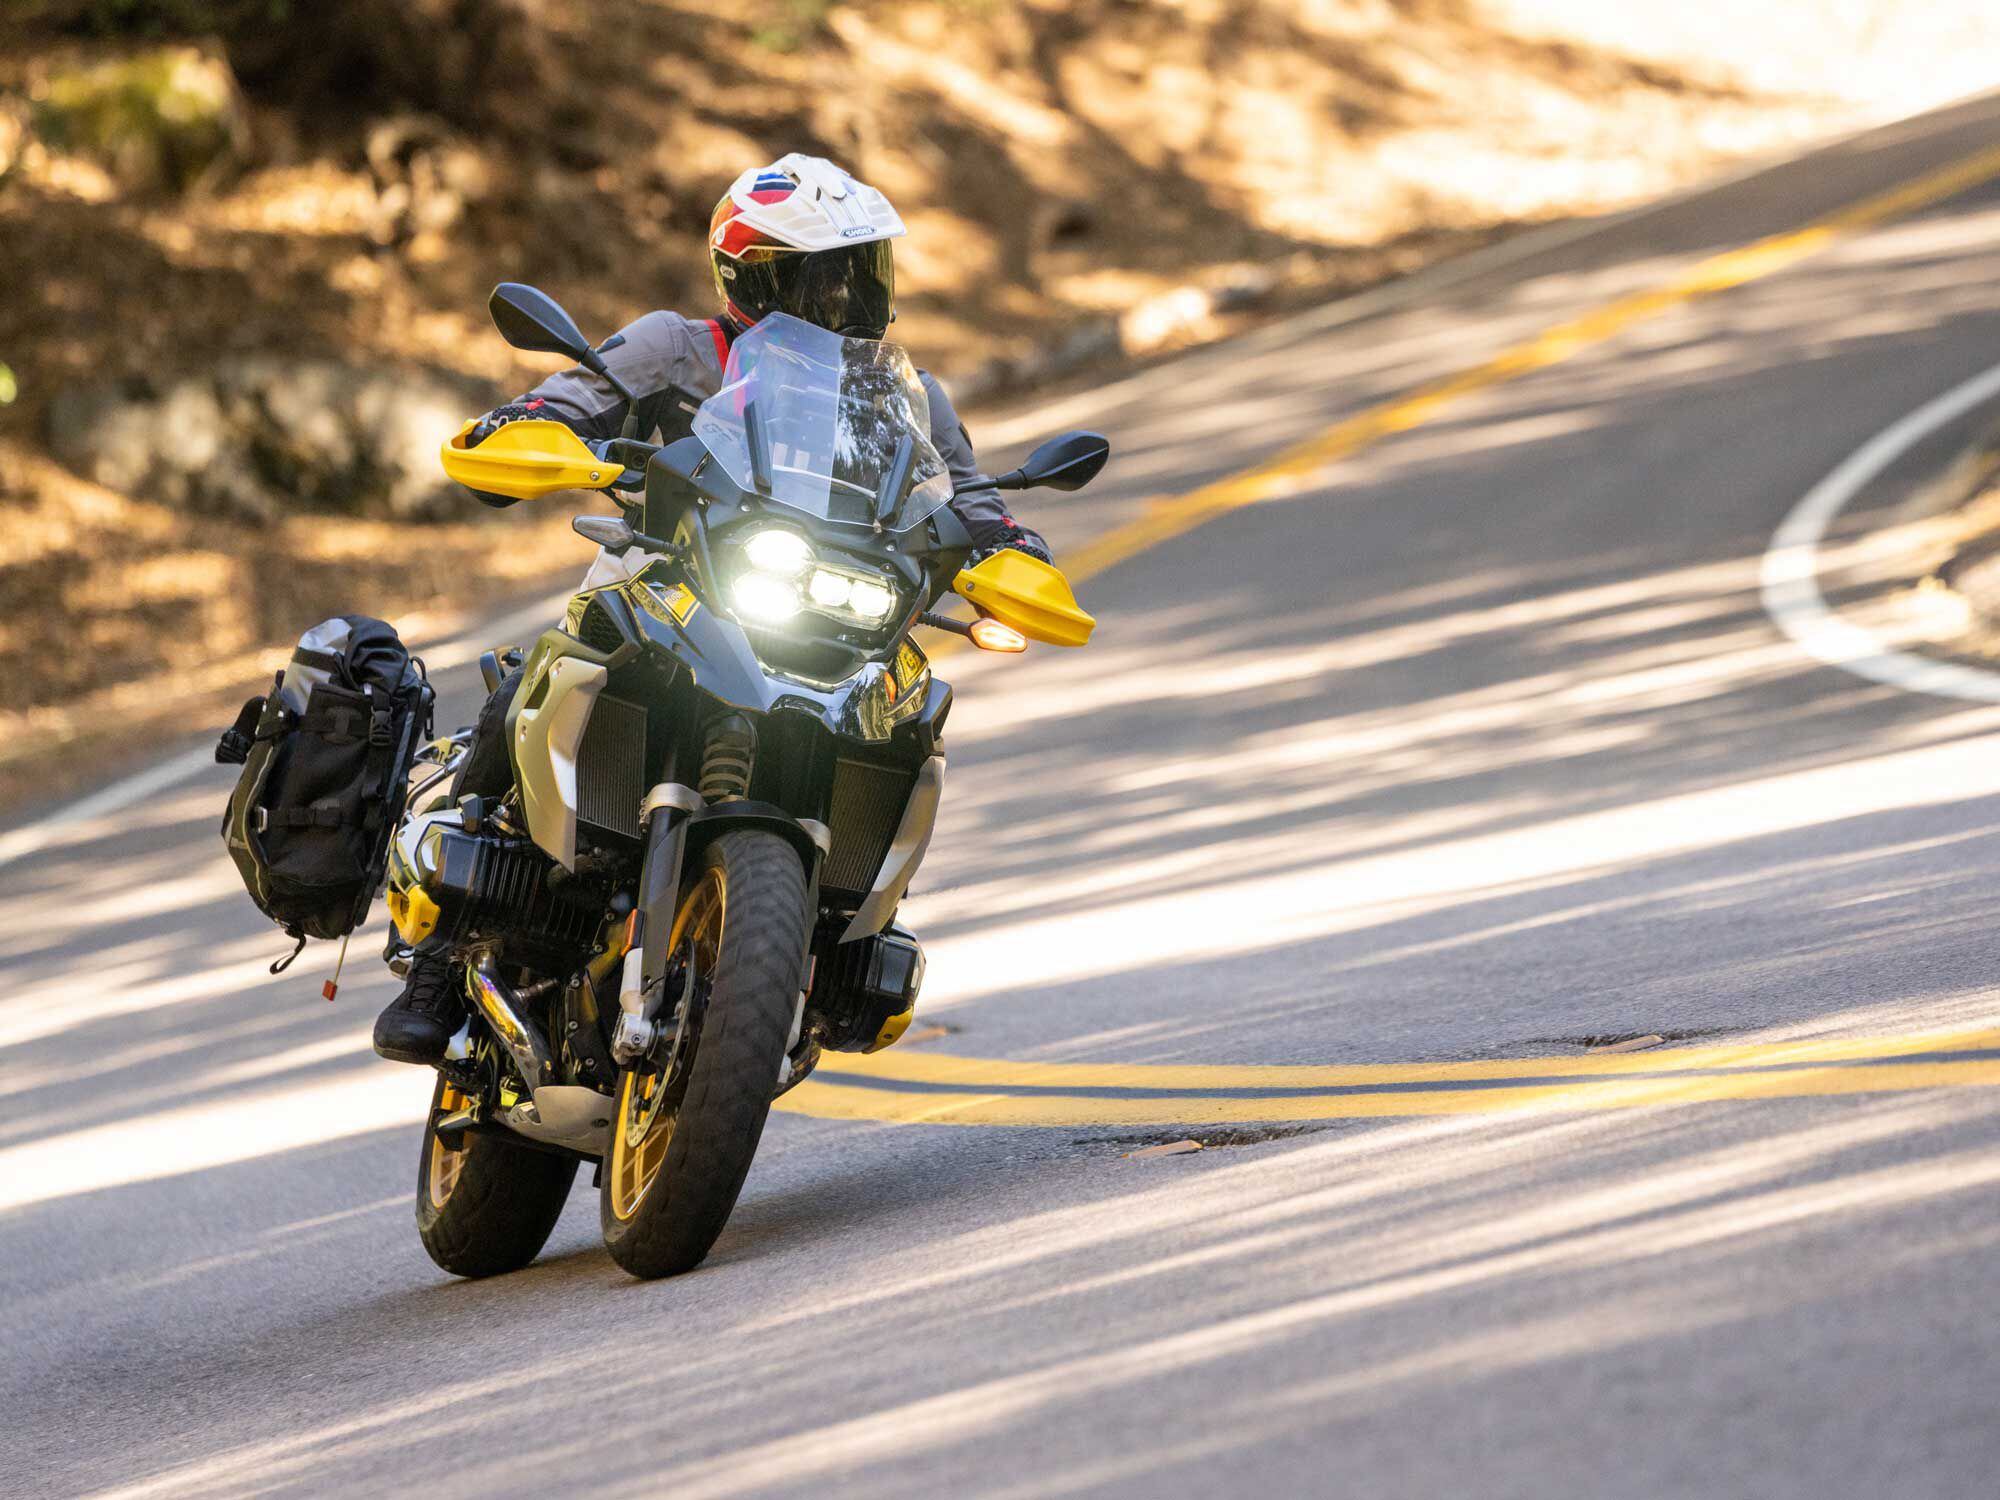 As usual we’re impressed by the R 1250 GS’s agility, especially for a 549-pound motorcycle.